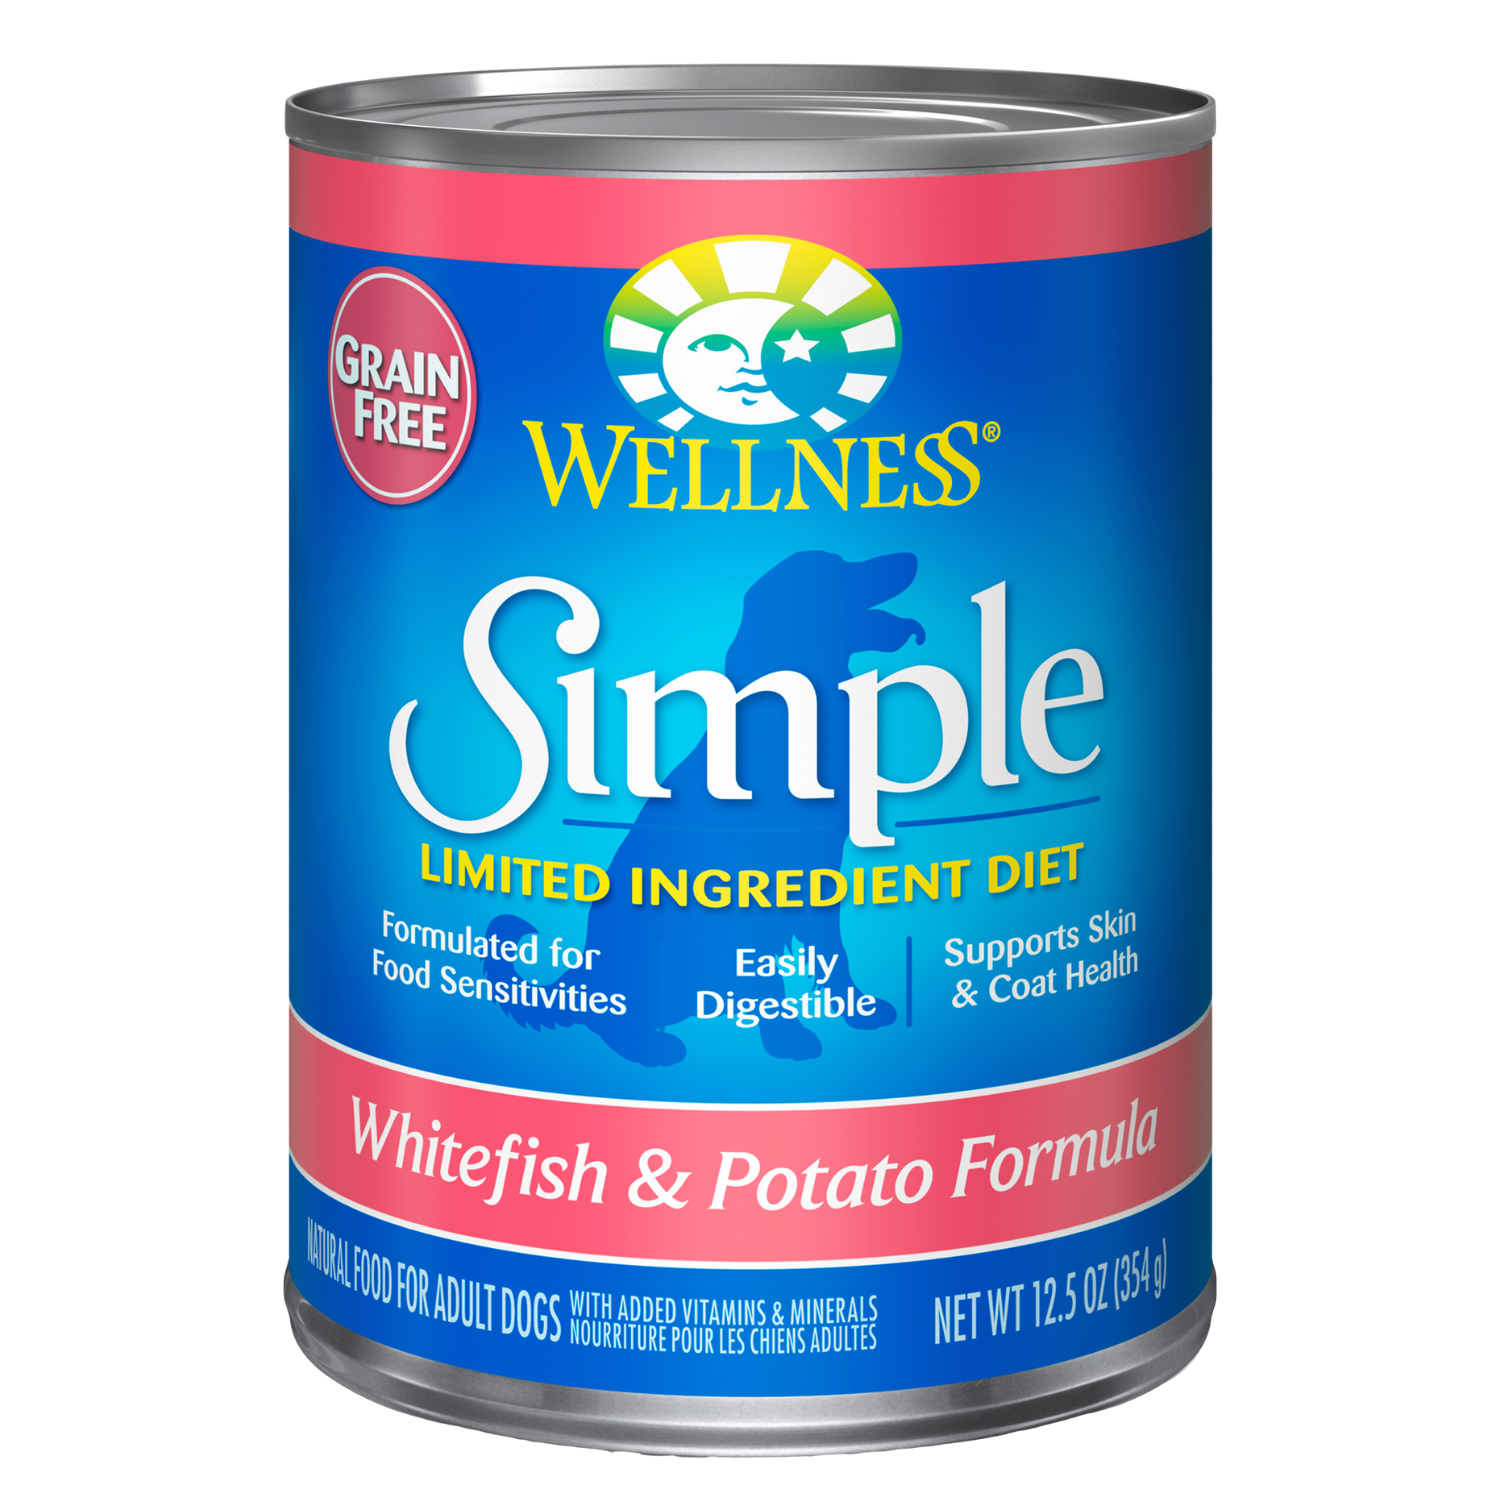 [DISCONTINUED] Wellness Simple Limited Ingredients Grain-Free (Whitefish & Potato) - 354g